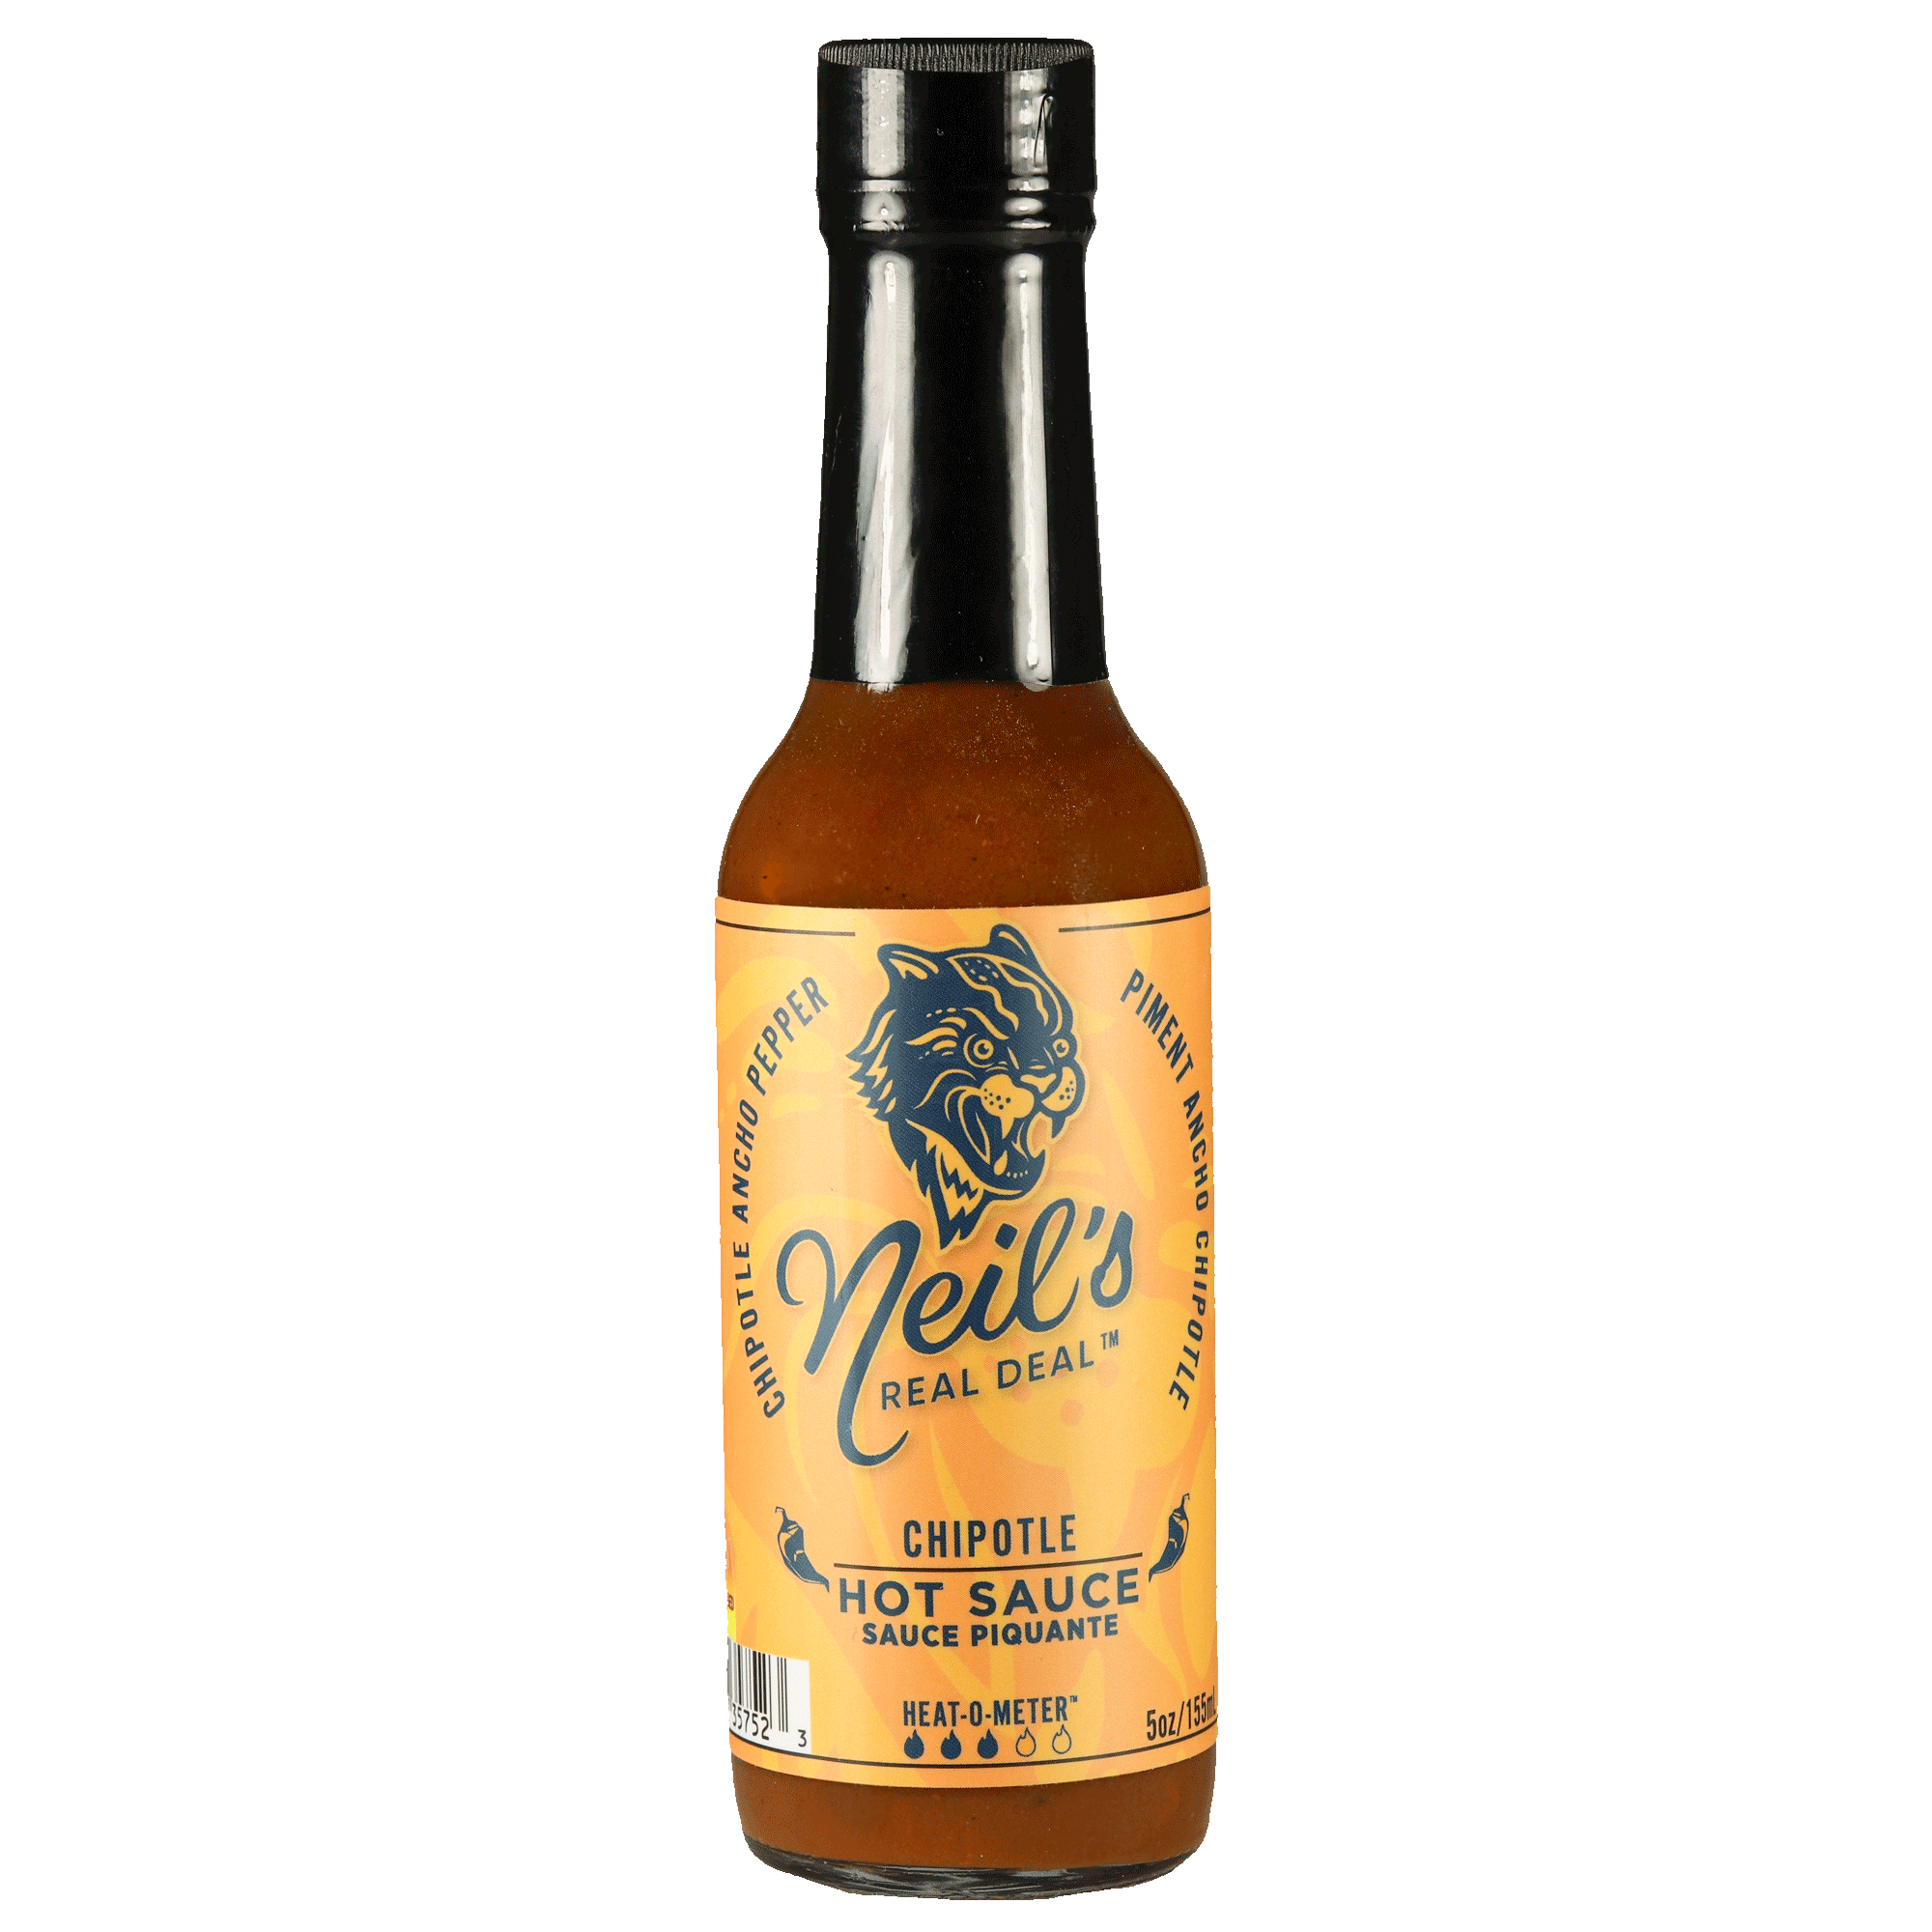 Chipotle Hot Sauce - Neil's Real Deal